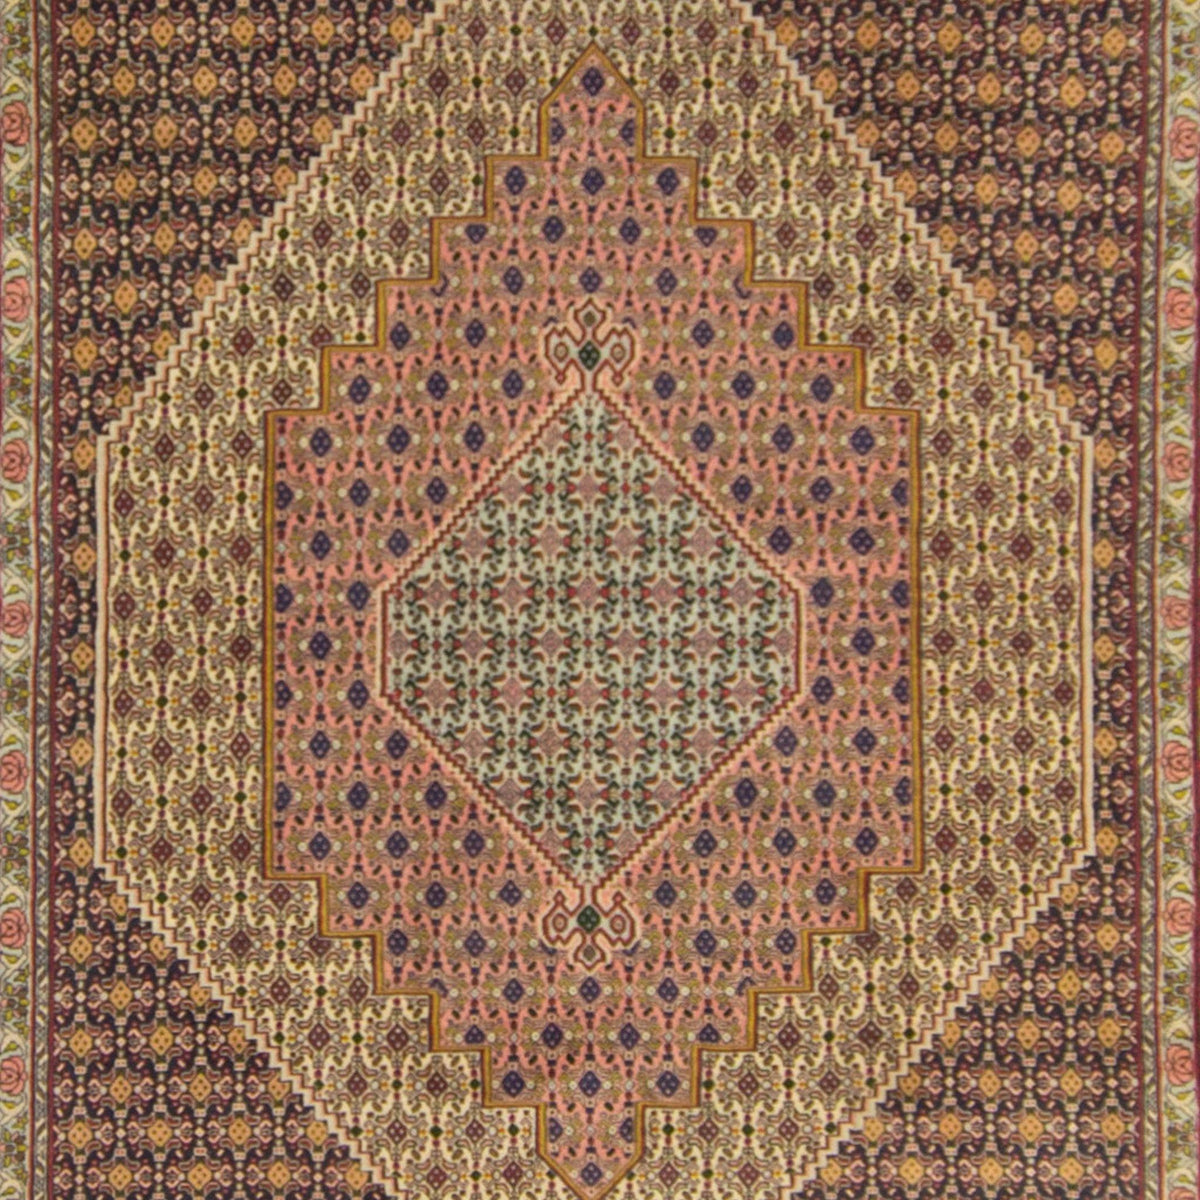 Fine Hand-knotted Wool Senneh Persian Rug 200cm x 310cm